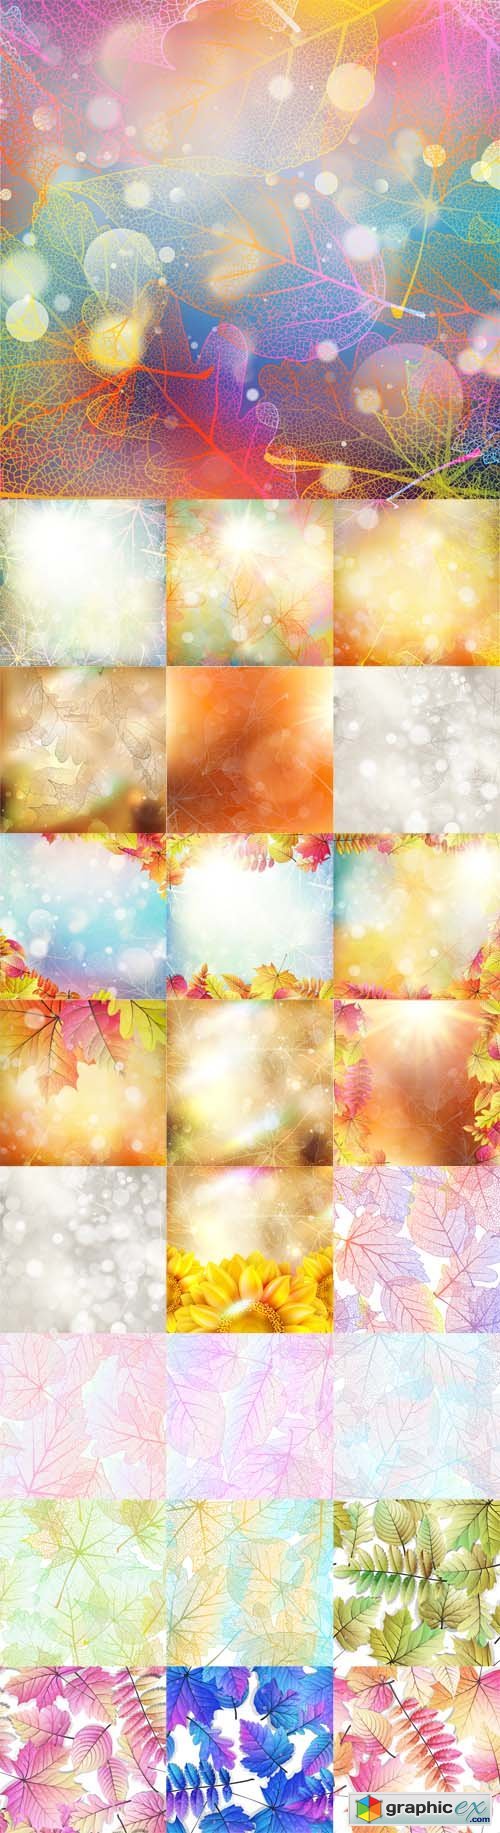 Beautiful Autumn Backgrounds with Sun